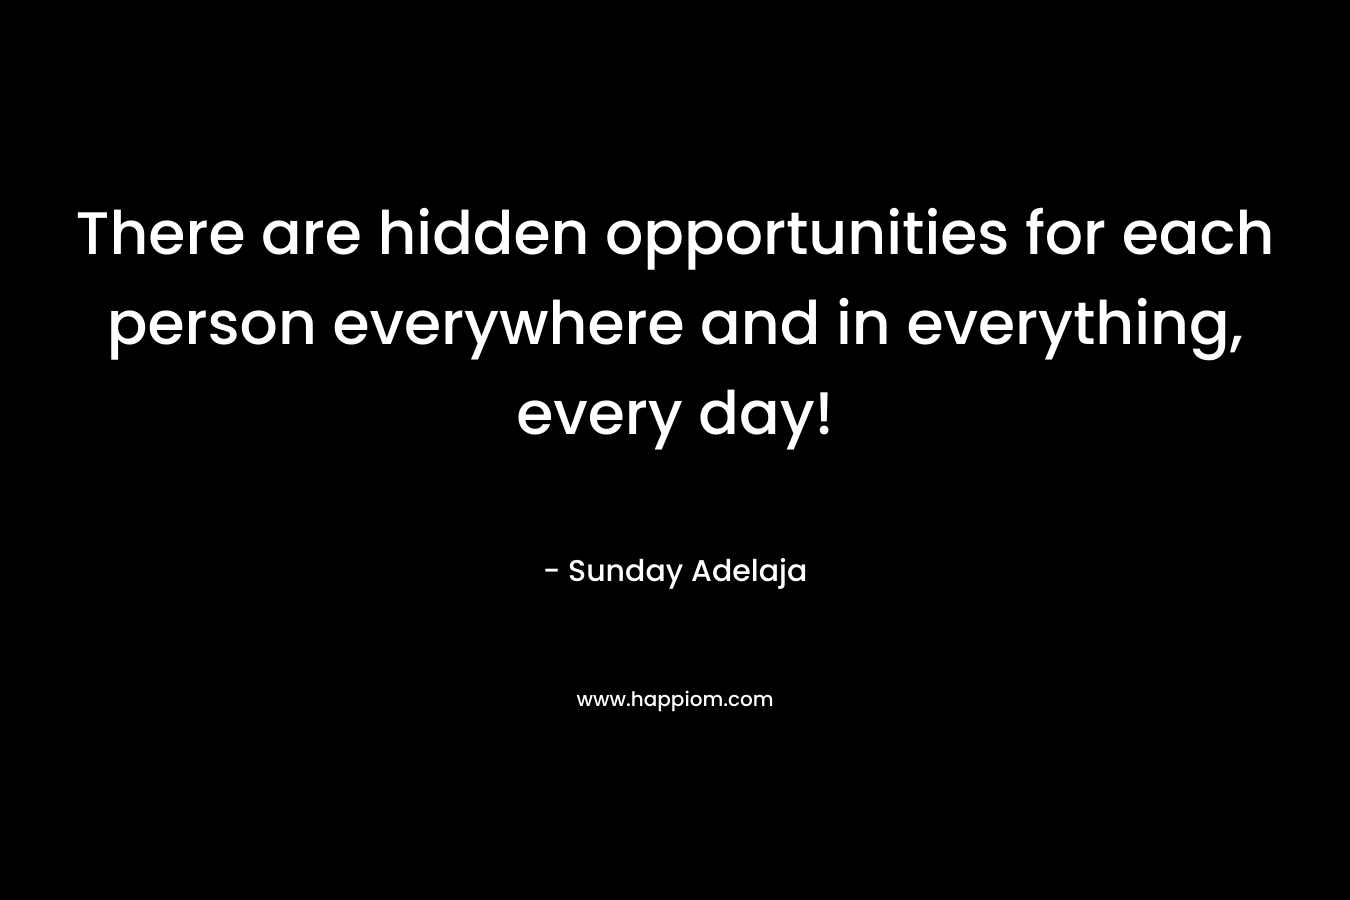 There are hidden opportunities for each person everywhere and in everything, every day! – Sunday Adelaja